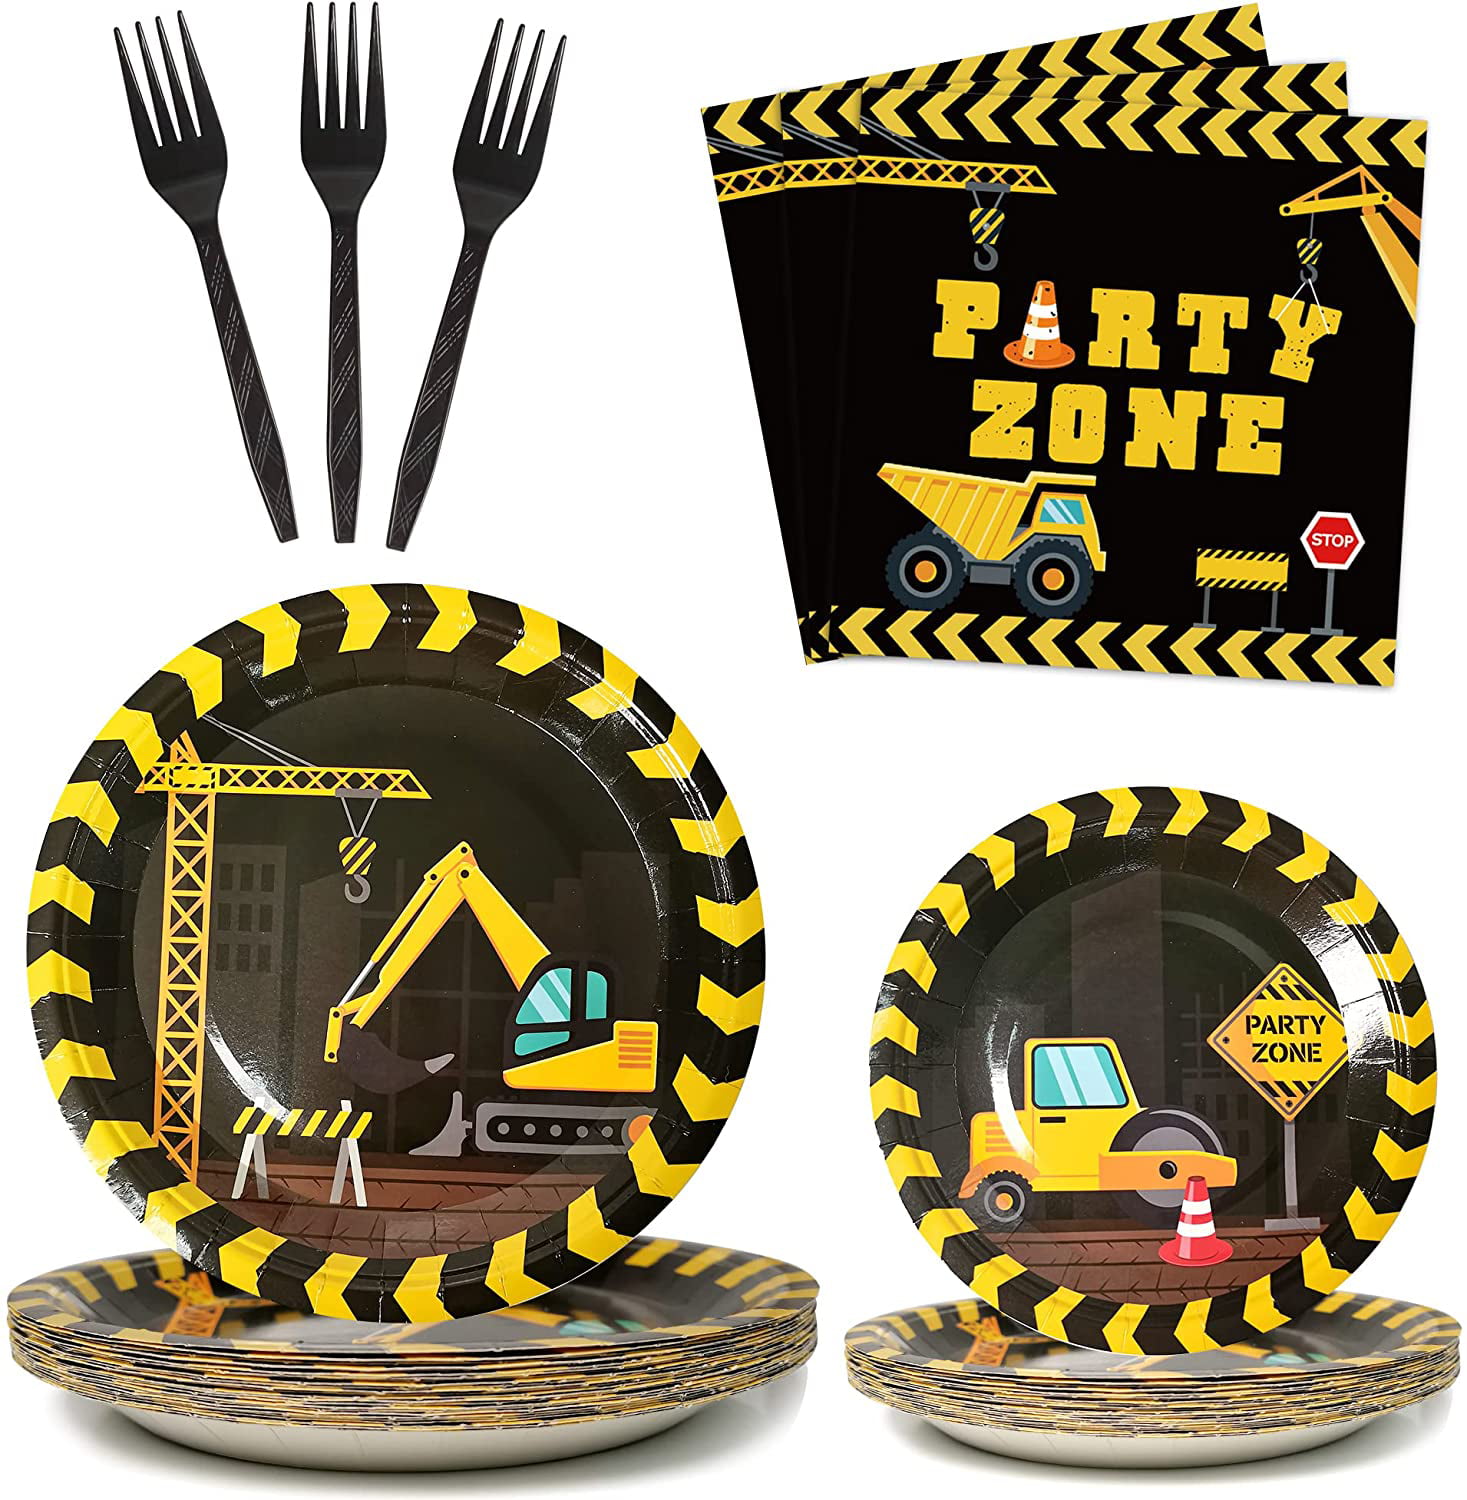 23cm Round Party Paper Plates Disposable Birthday Tableware Table Decorations 